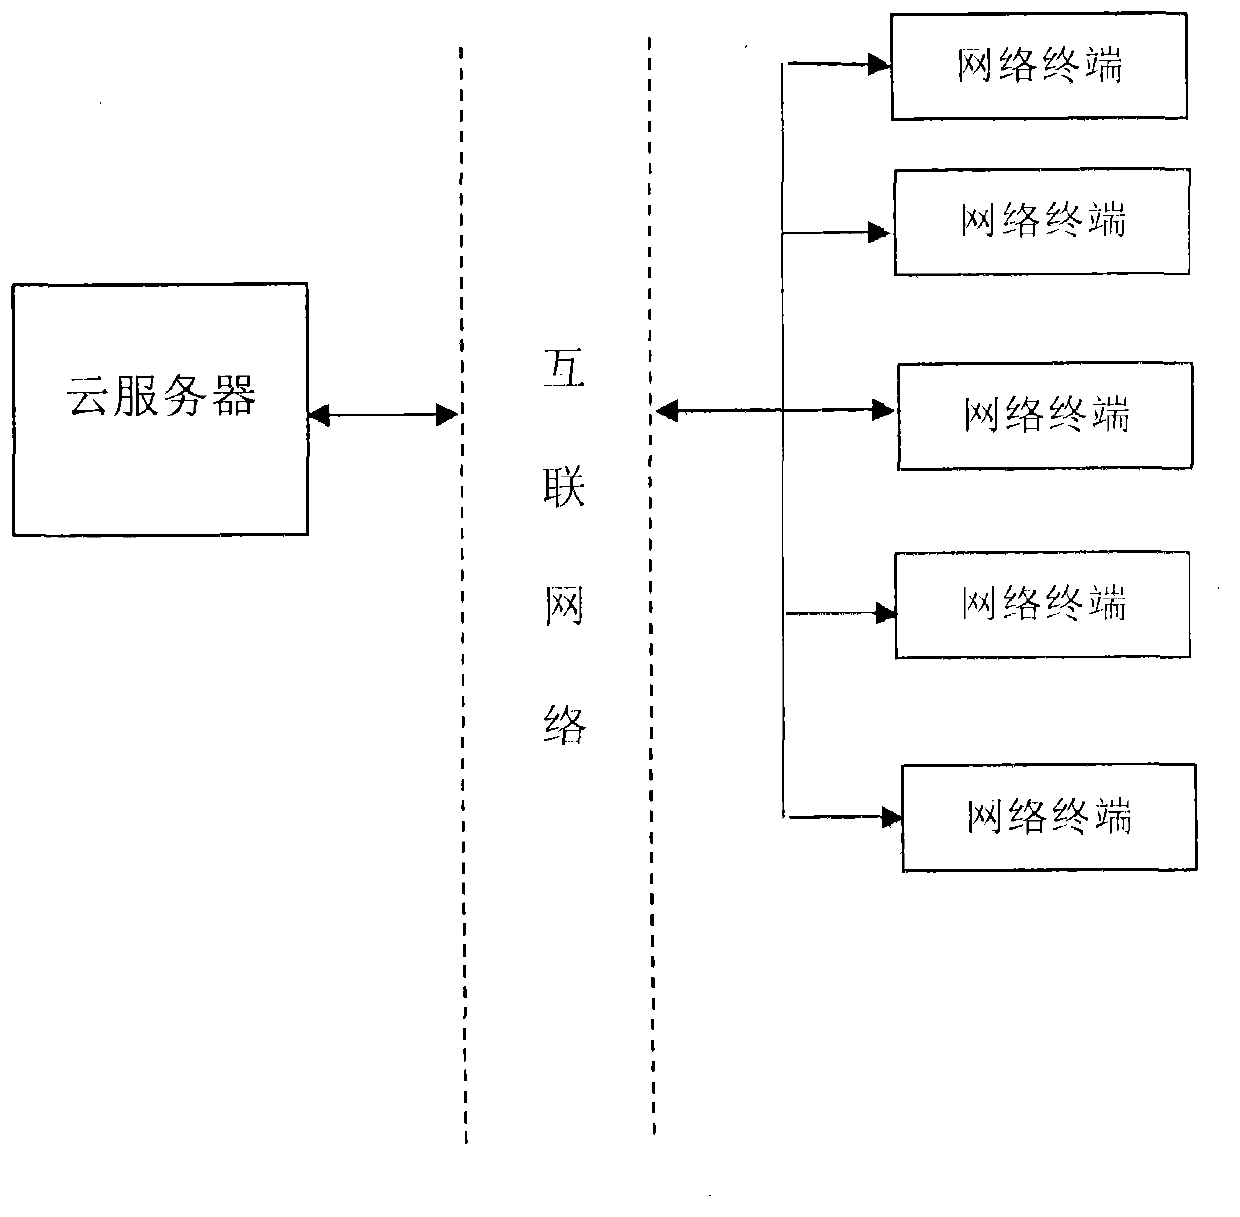 Personal cloud cooperation system and data management method